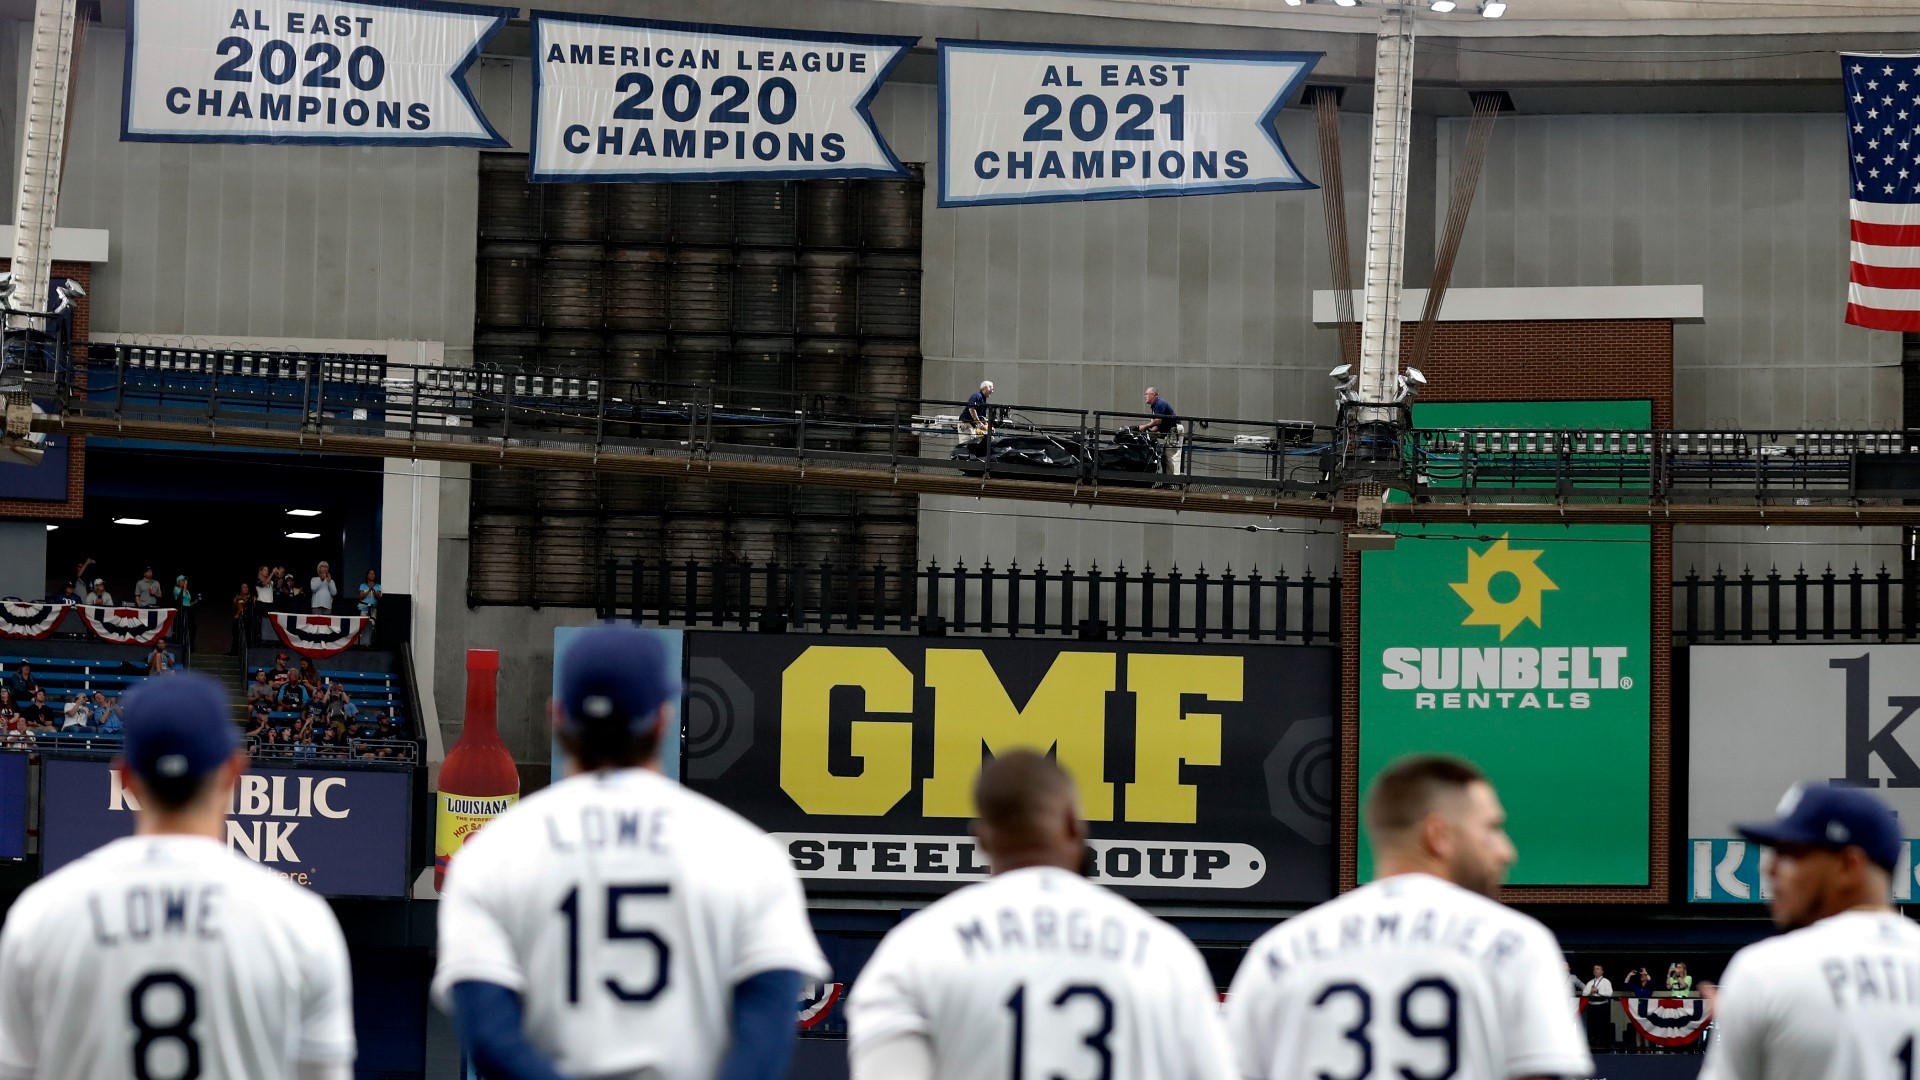 2022 is a make-or-break year for the Rays.